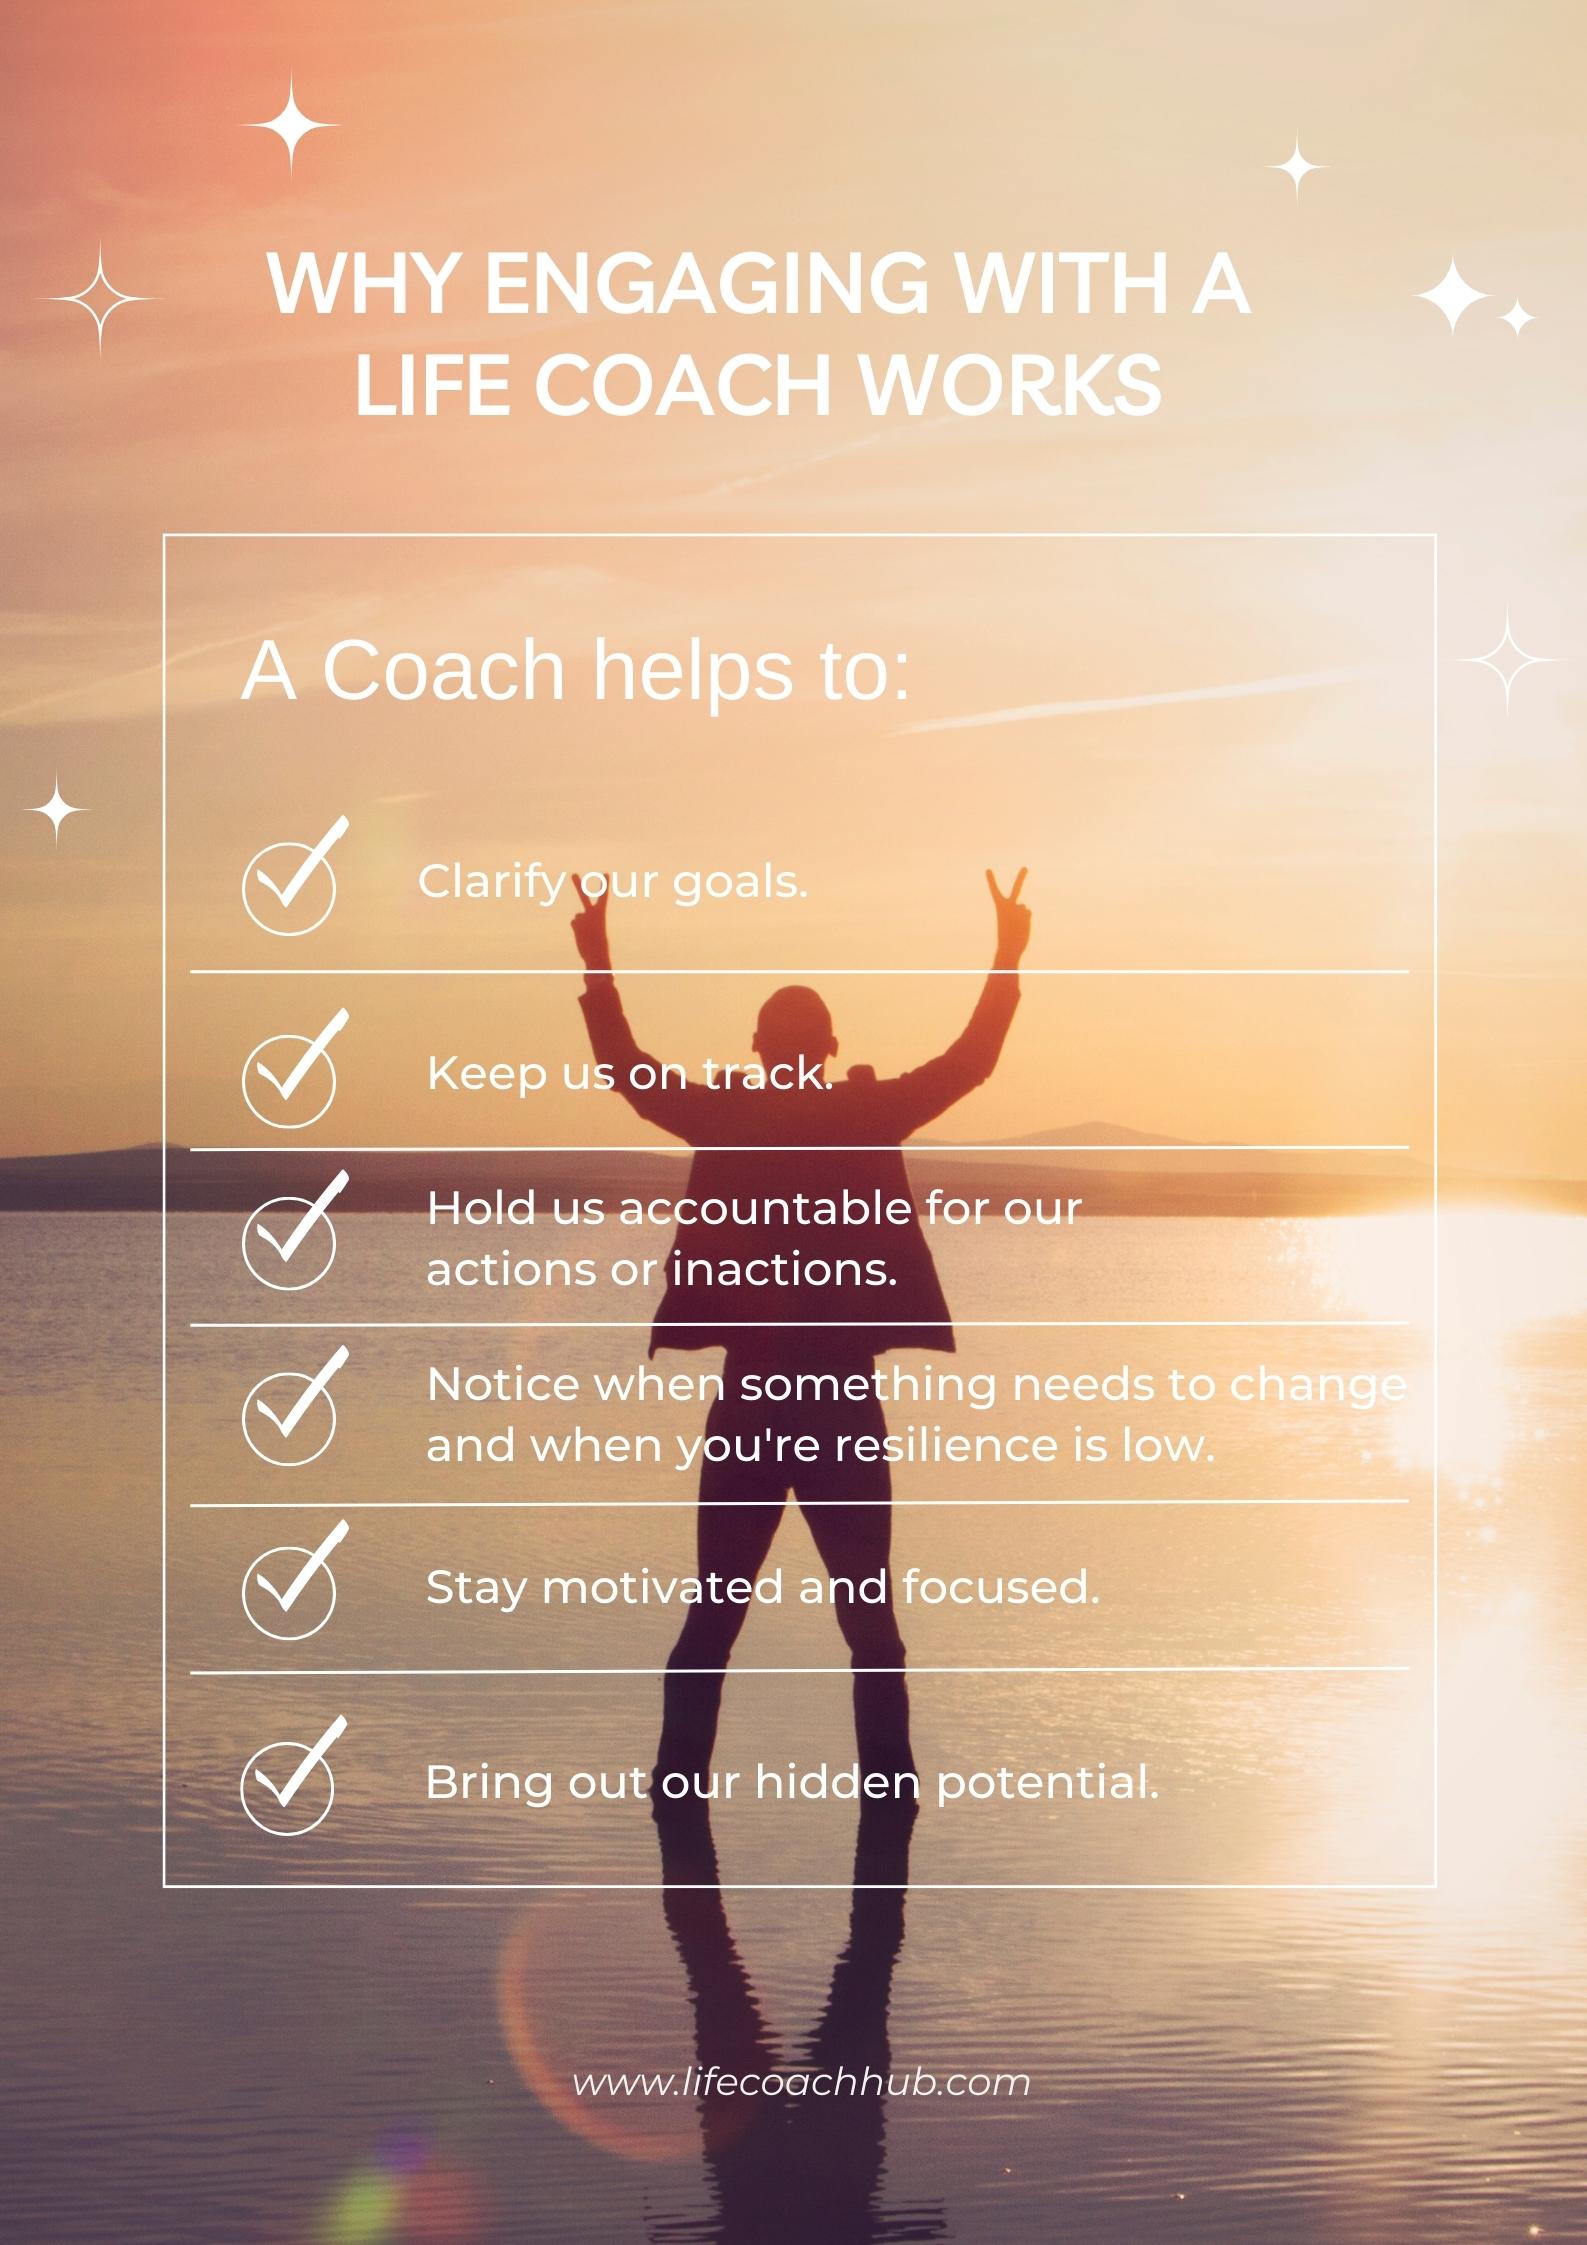 Why engaging with a life coach works